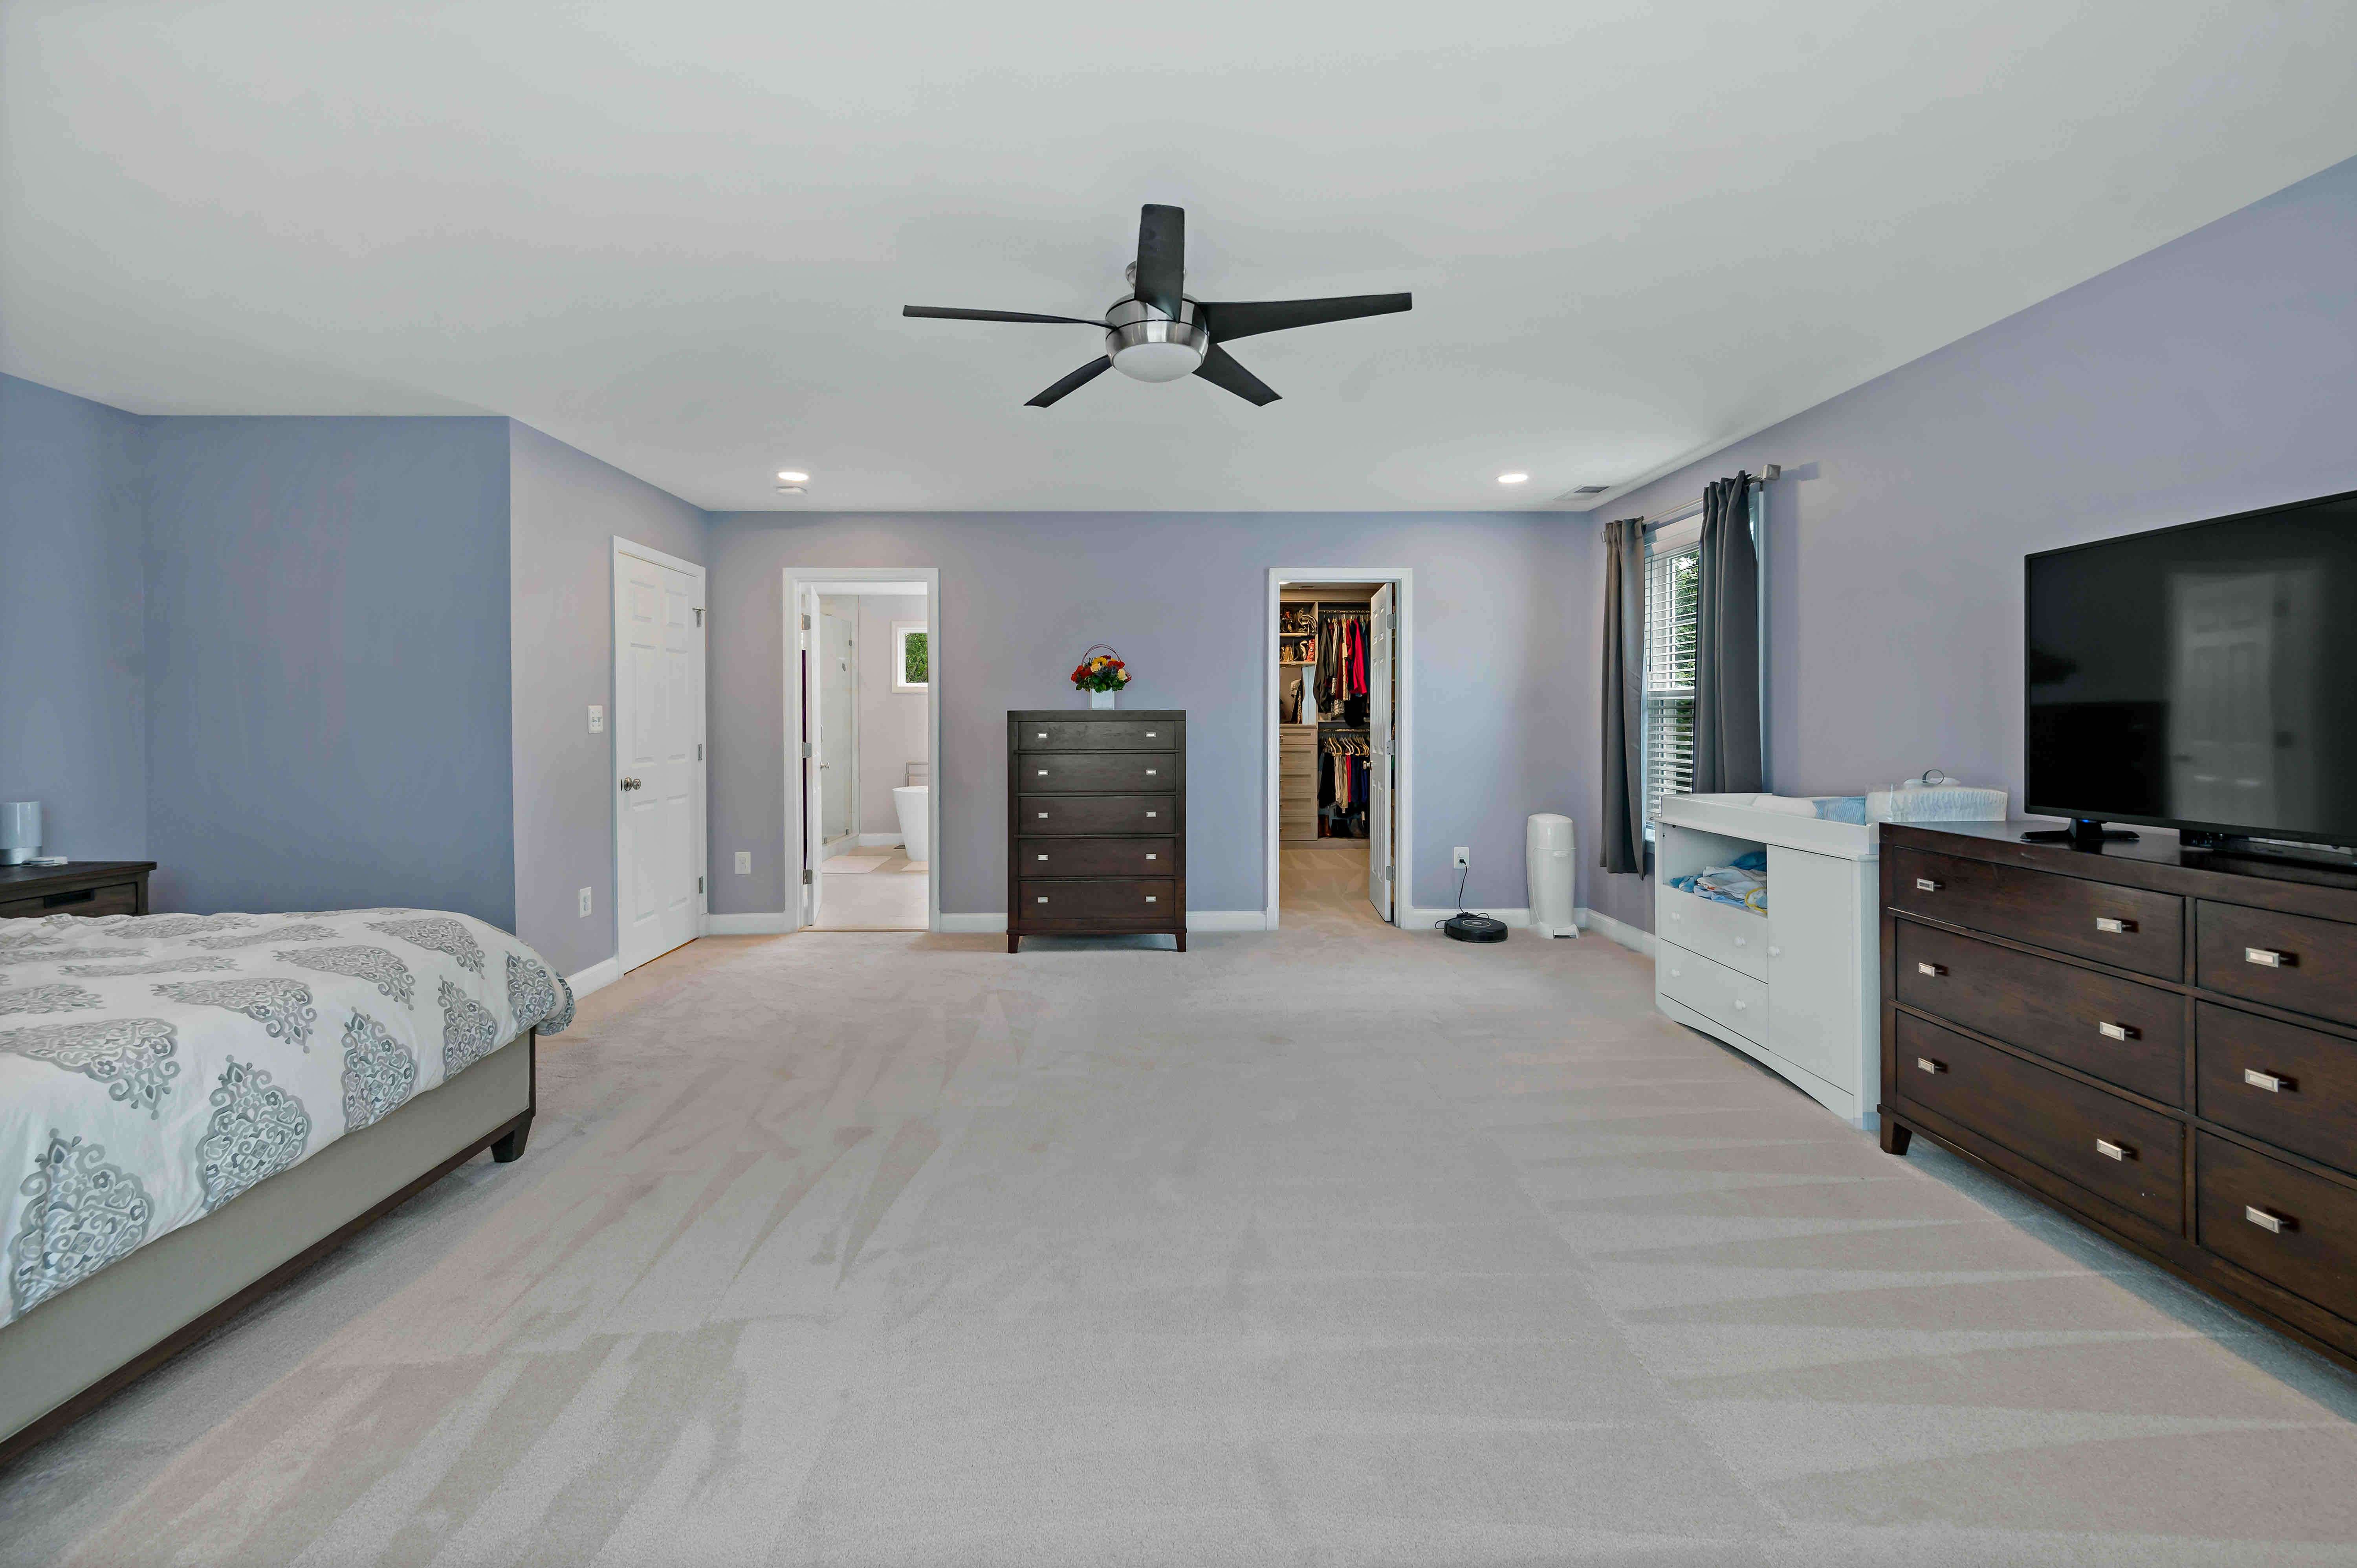 Large spacious master bedroom with ceiling fan